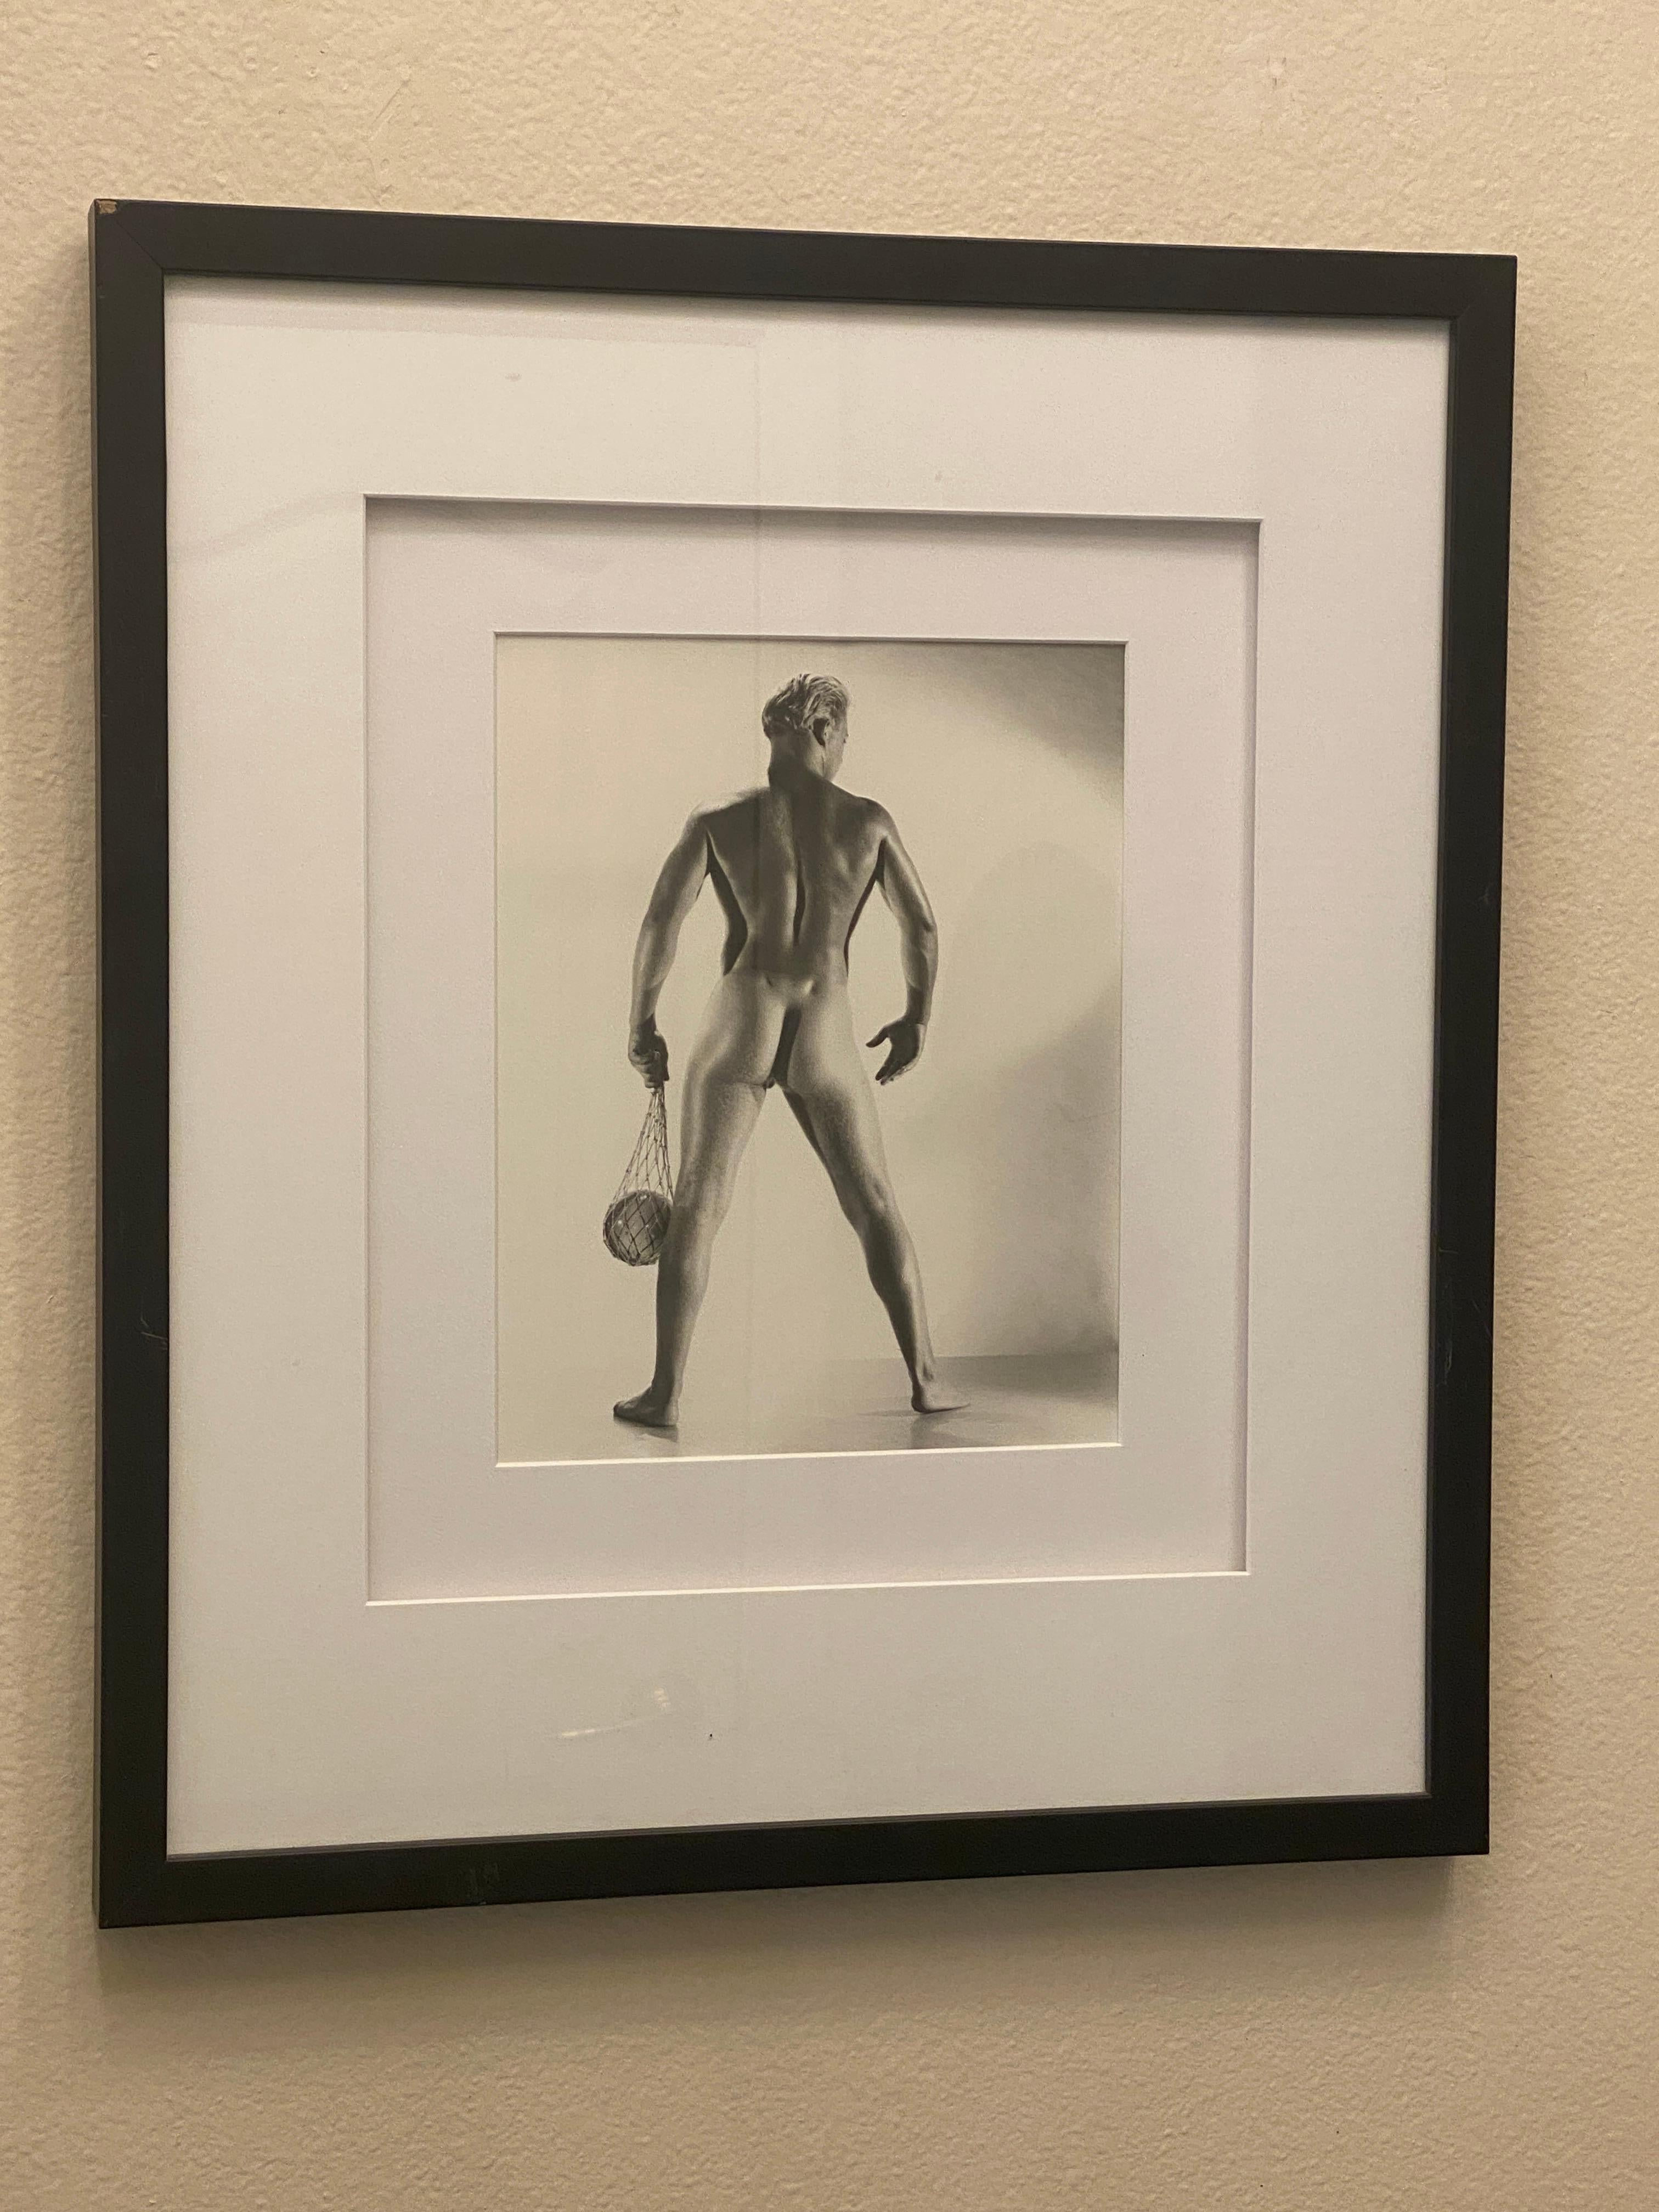 From an important 25 plus year collection of Male Physique and Beefcake photography, image # 7 of handsome male model Bill Gregory. Printed in the 1960s and are all signed by the studio on verso when Mr. Bruce Bellas aka Bruce of LA was alive.